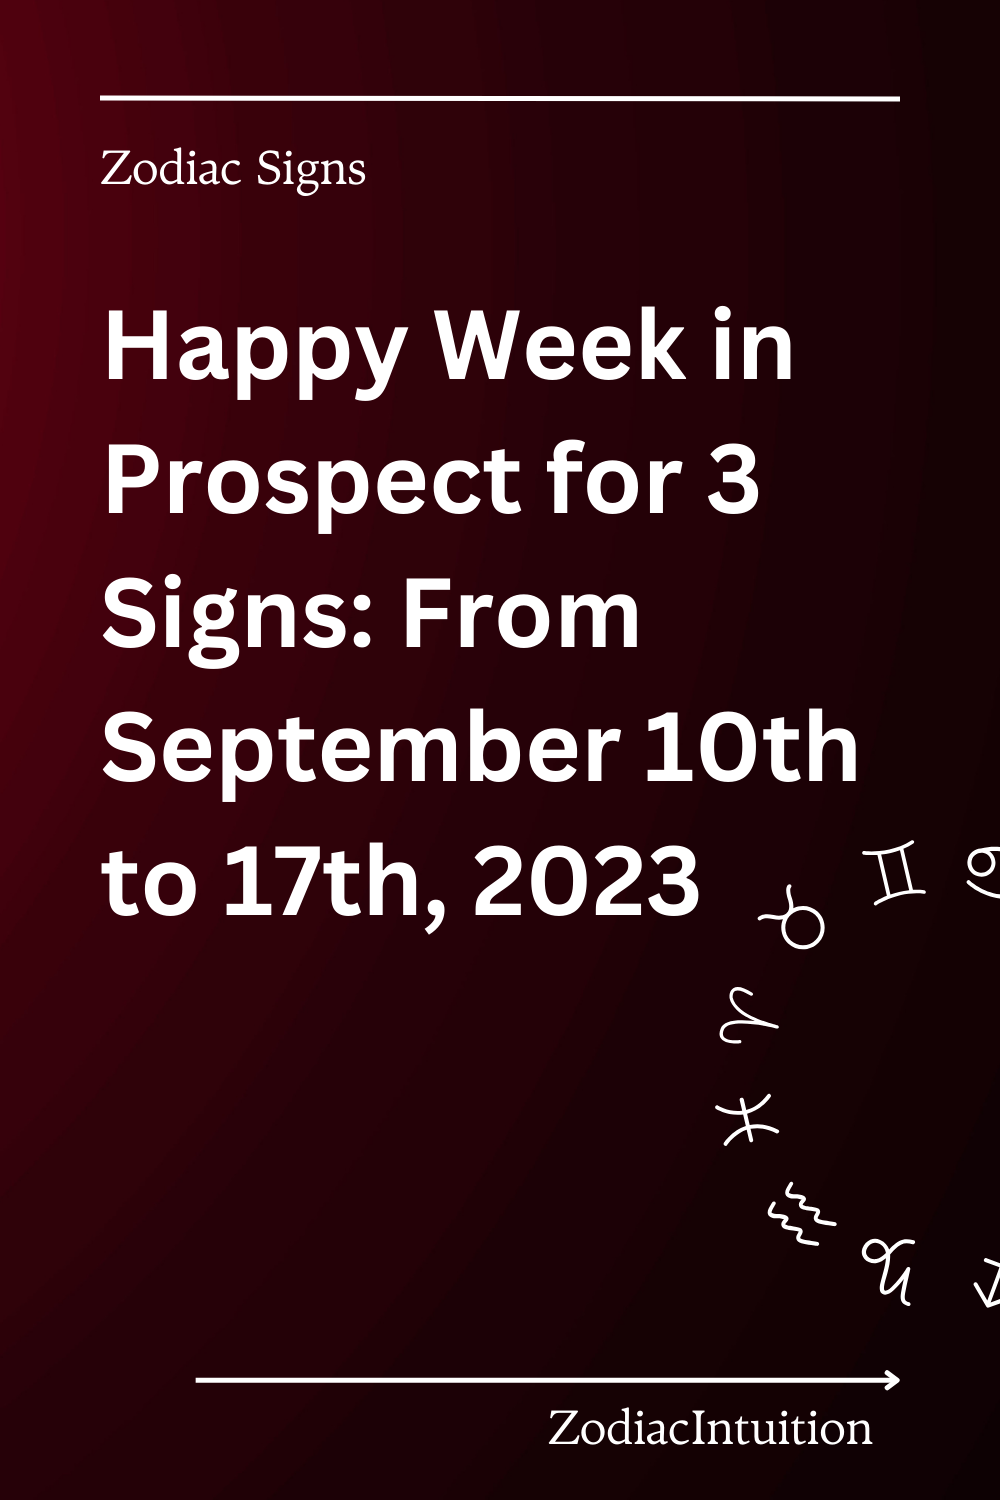 Happy Week in Prospect for 3 Signs: From September 10th to 17th, 2023